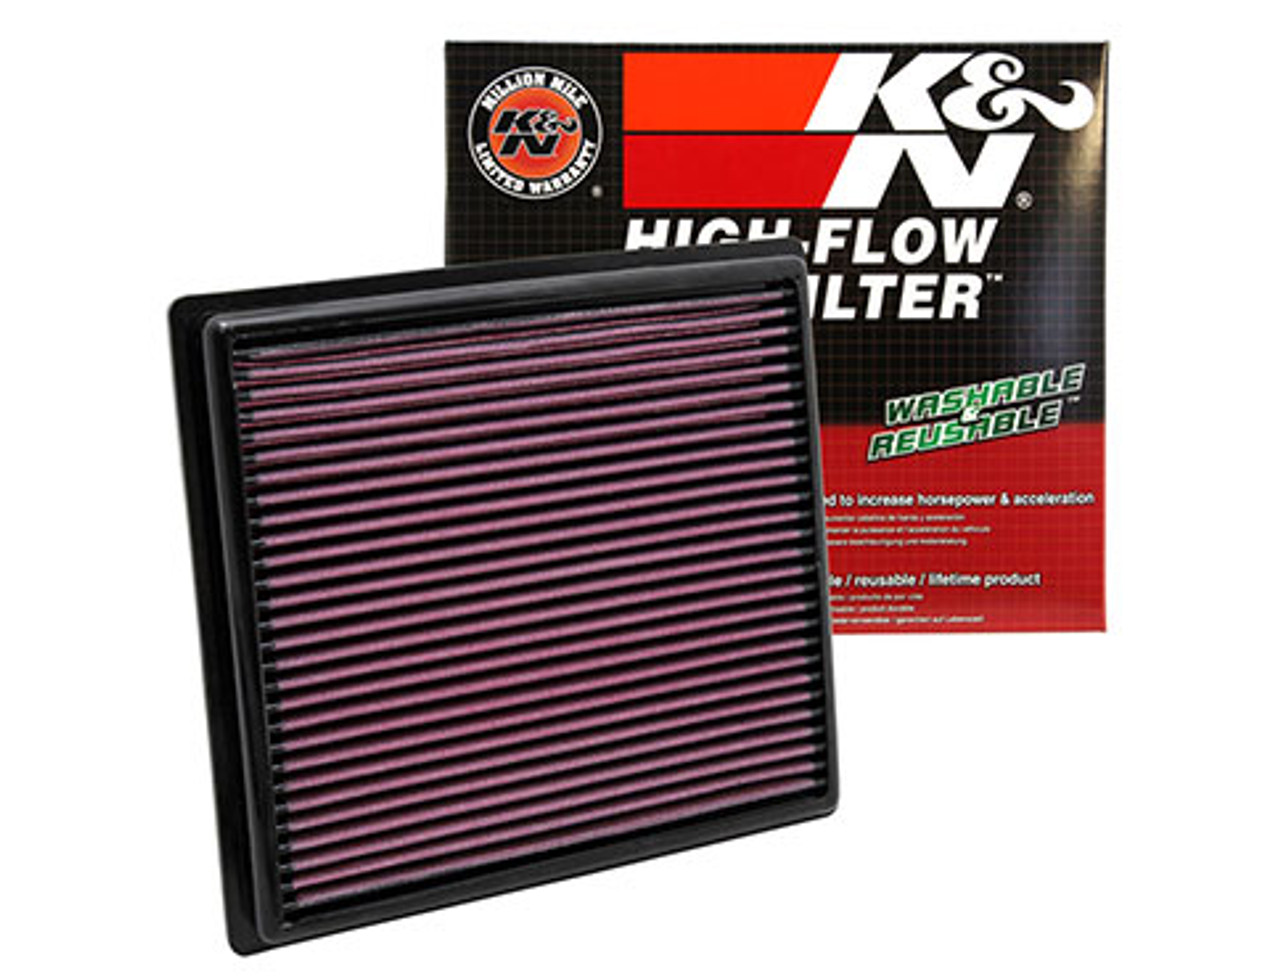 2018 Camry K&N Engine Air Filter - Fits both L4 and V6 engines